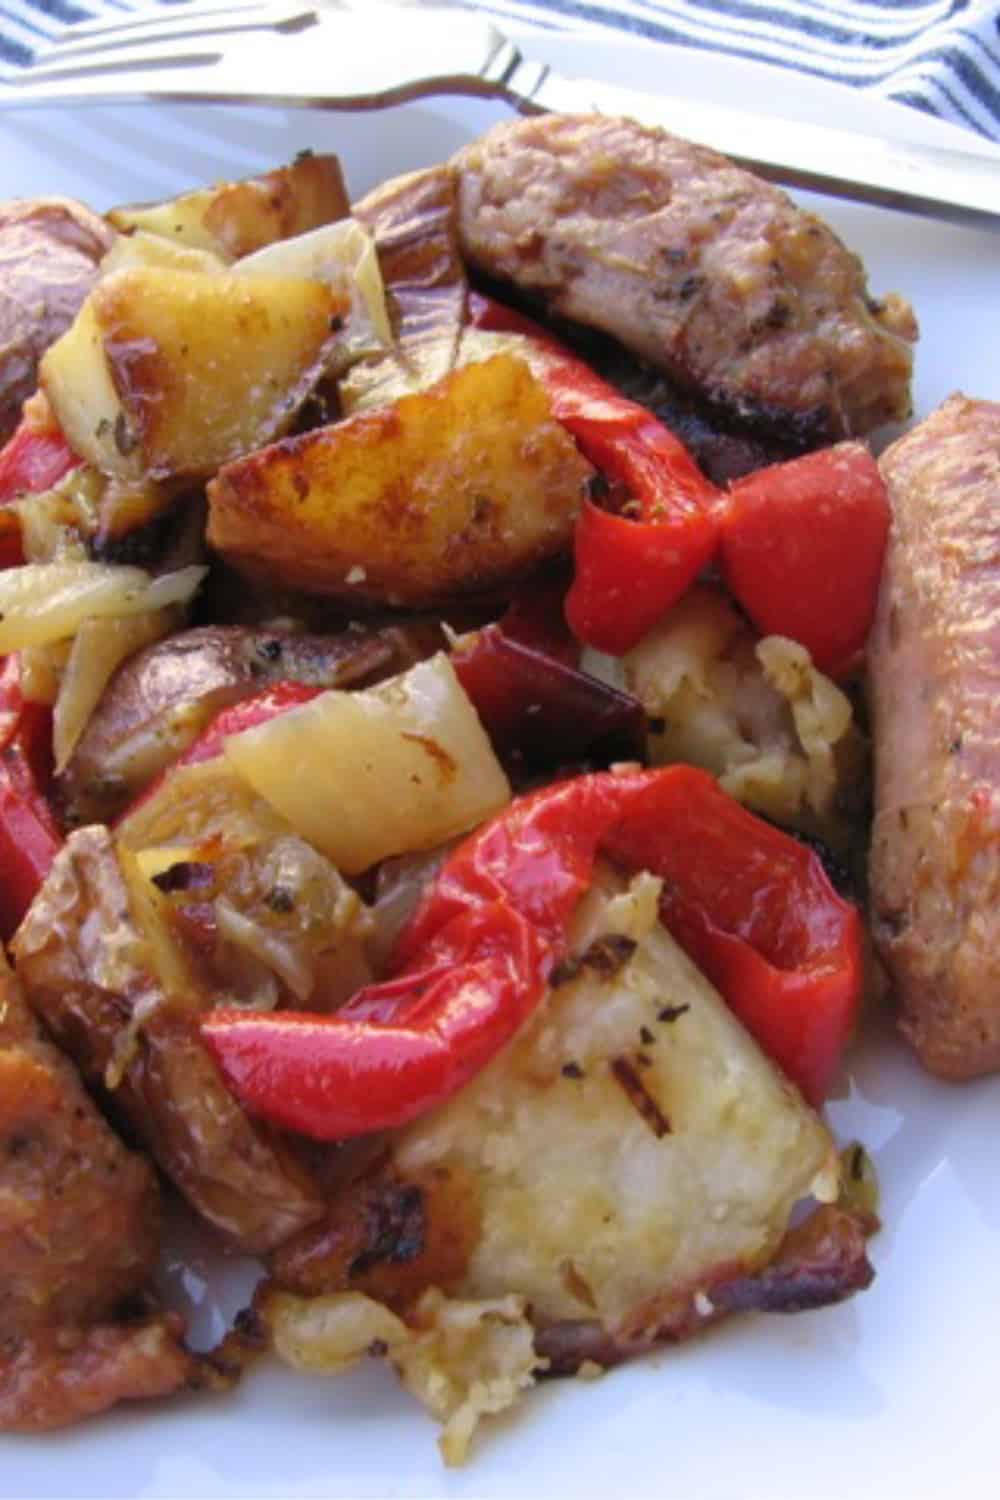 Sausage, pepper, onion and potato close-up on a white plate.